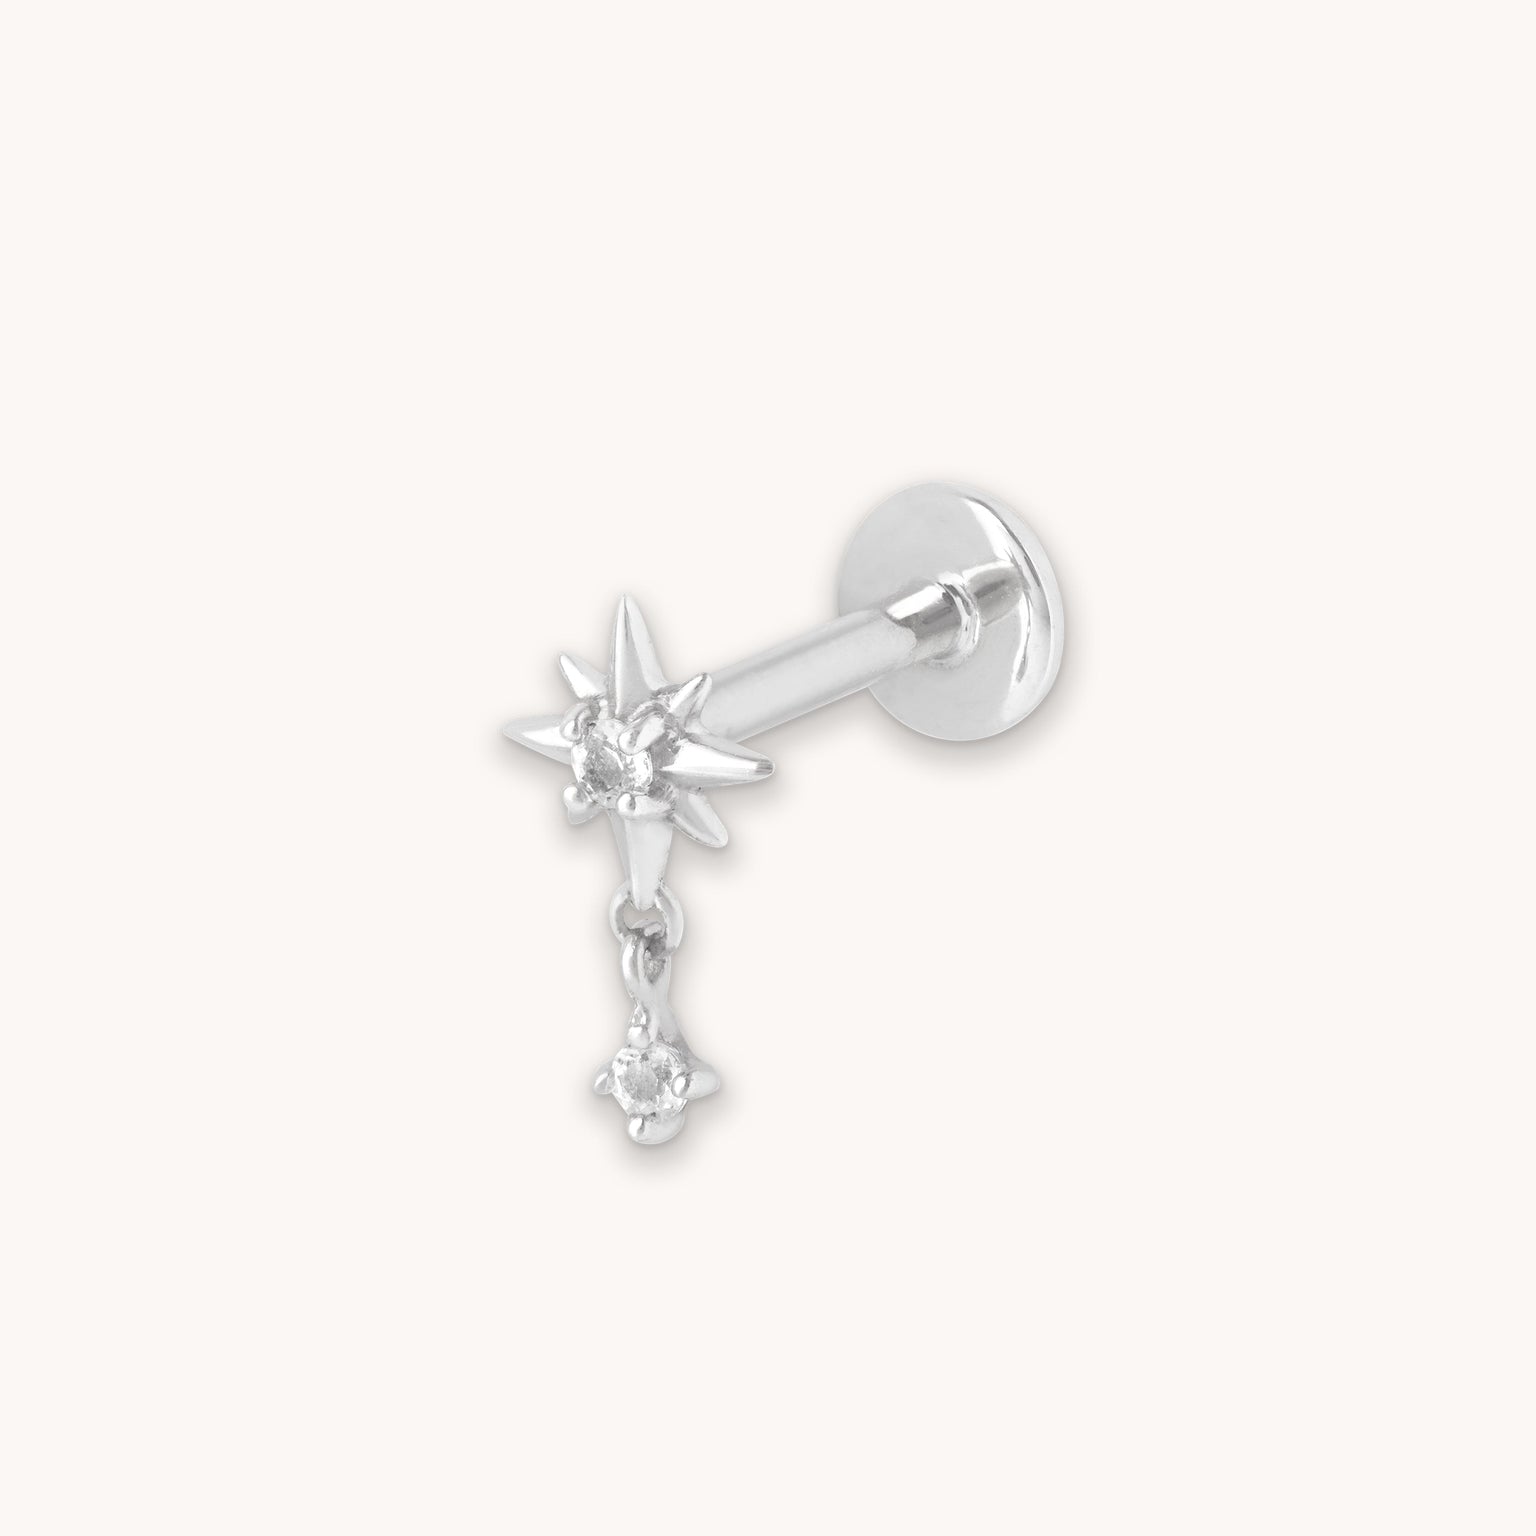 Twilight Star Charm Piercing Stud in Solid White Gold